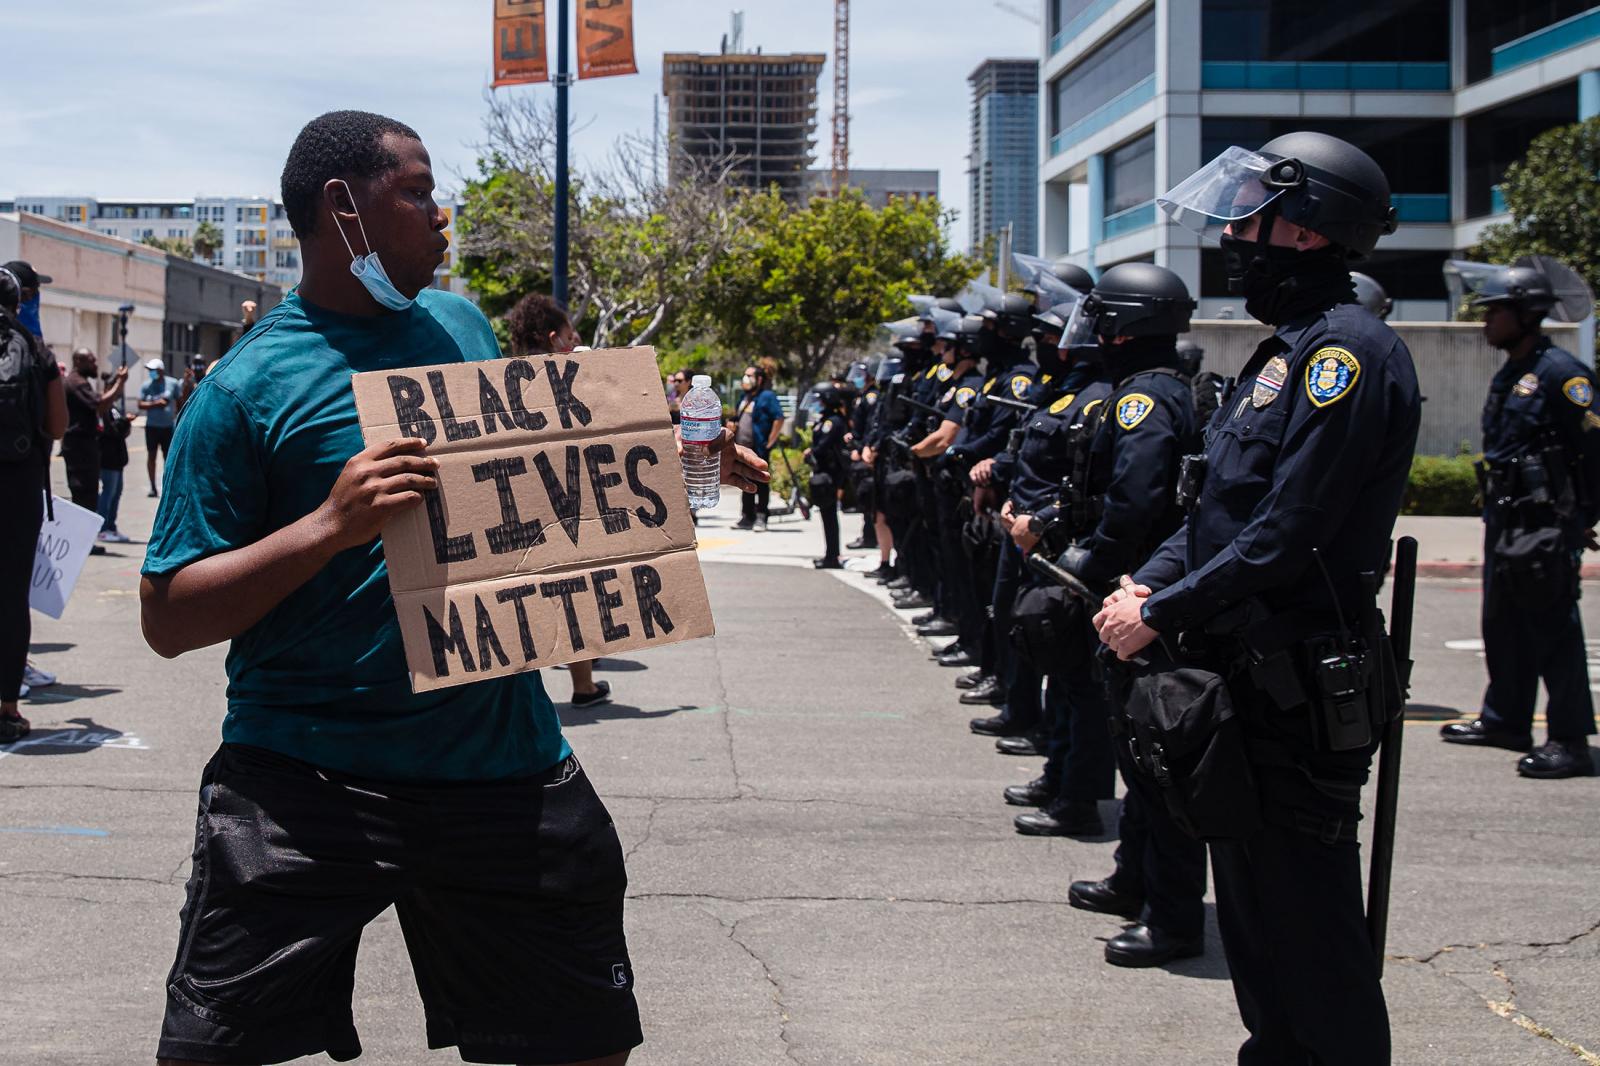 Image from United States - A man holds a "Black Lives Matter" sign in...